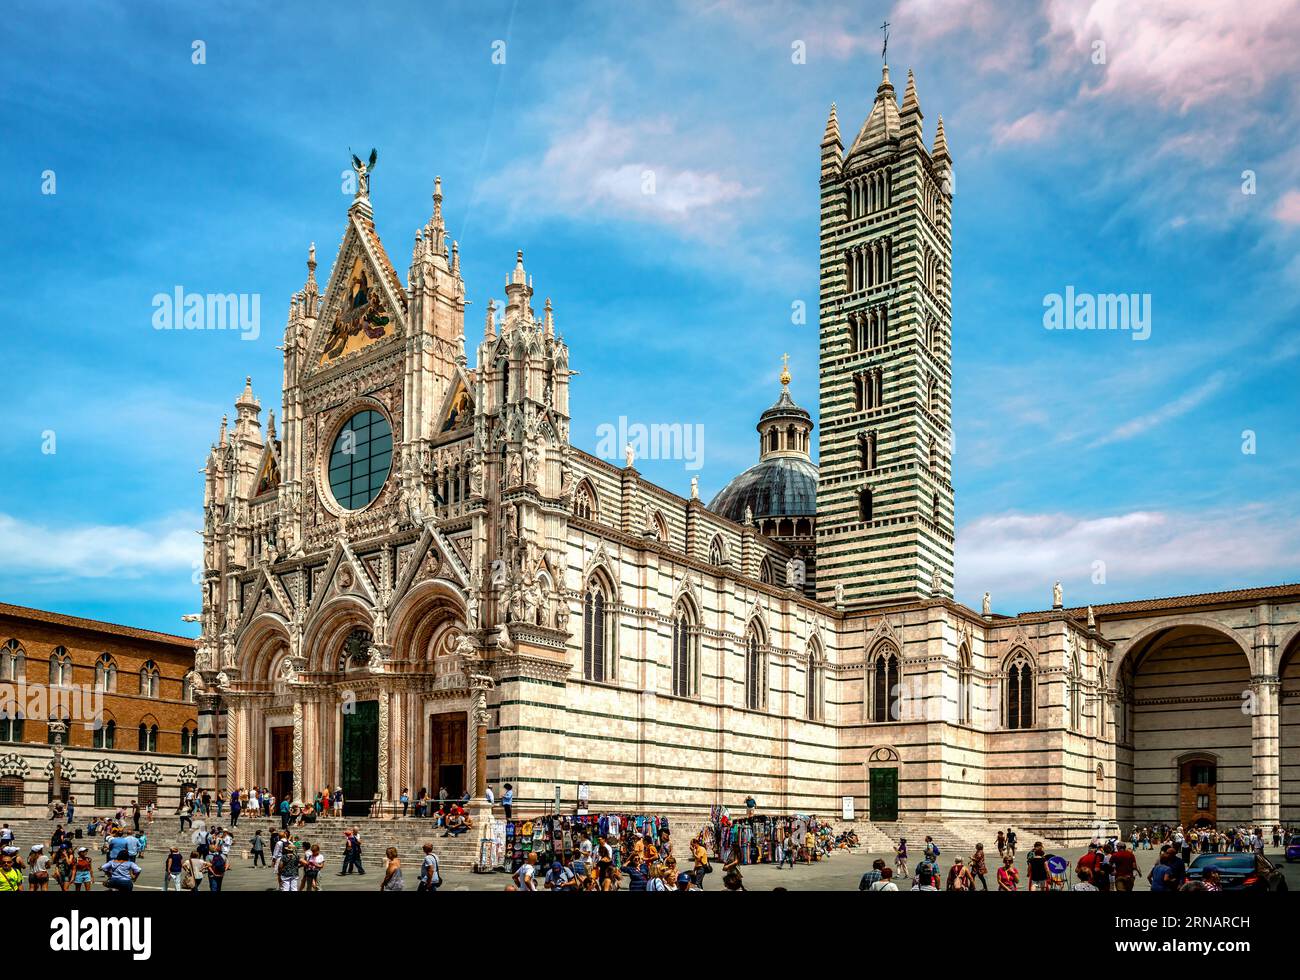 Siena, Italy - May 29 2018: The Cathedral. The church was designed and completed between 1215 and 1263 and its dedicated to the Assumption of Mary. Stock Photo